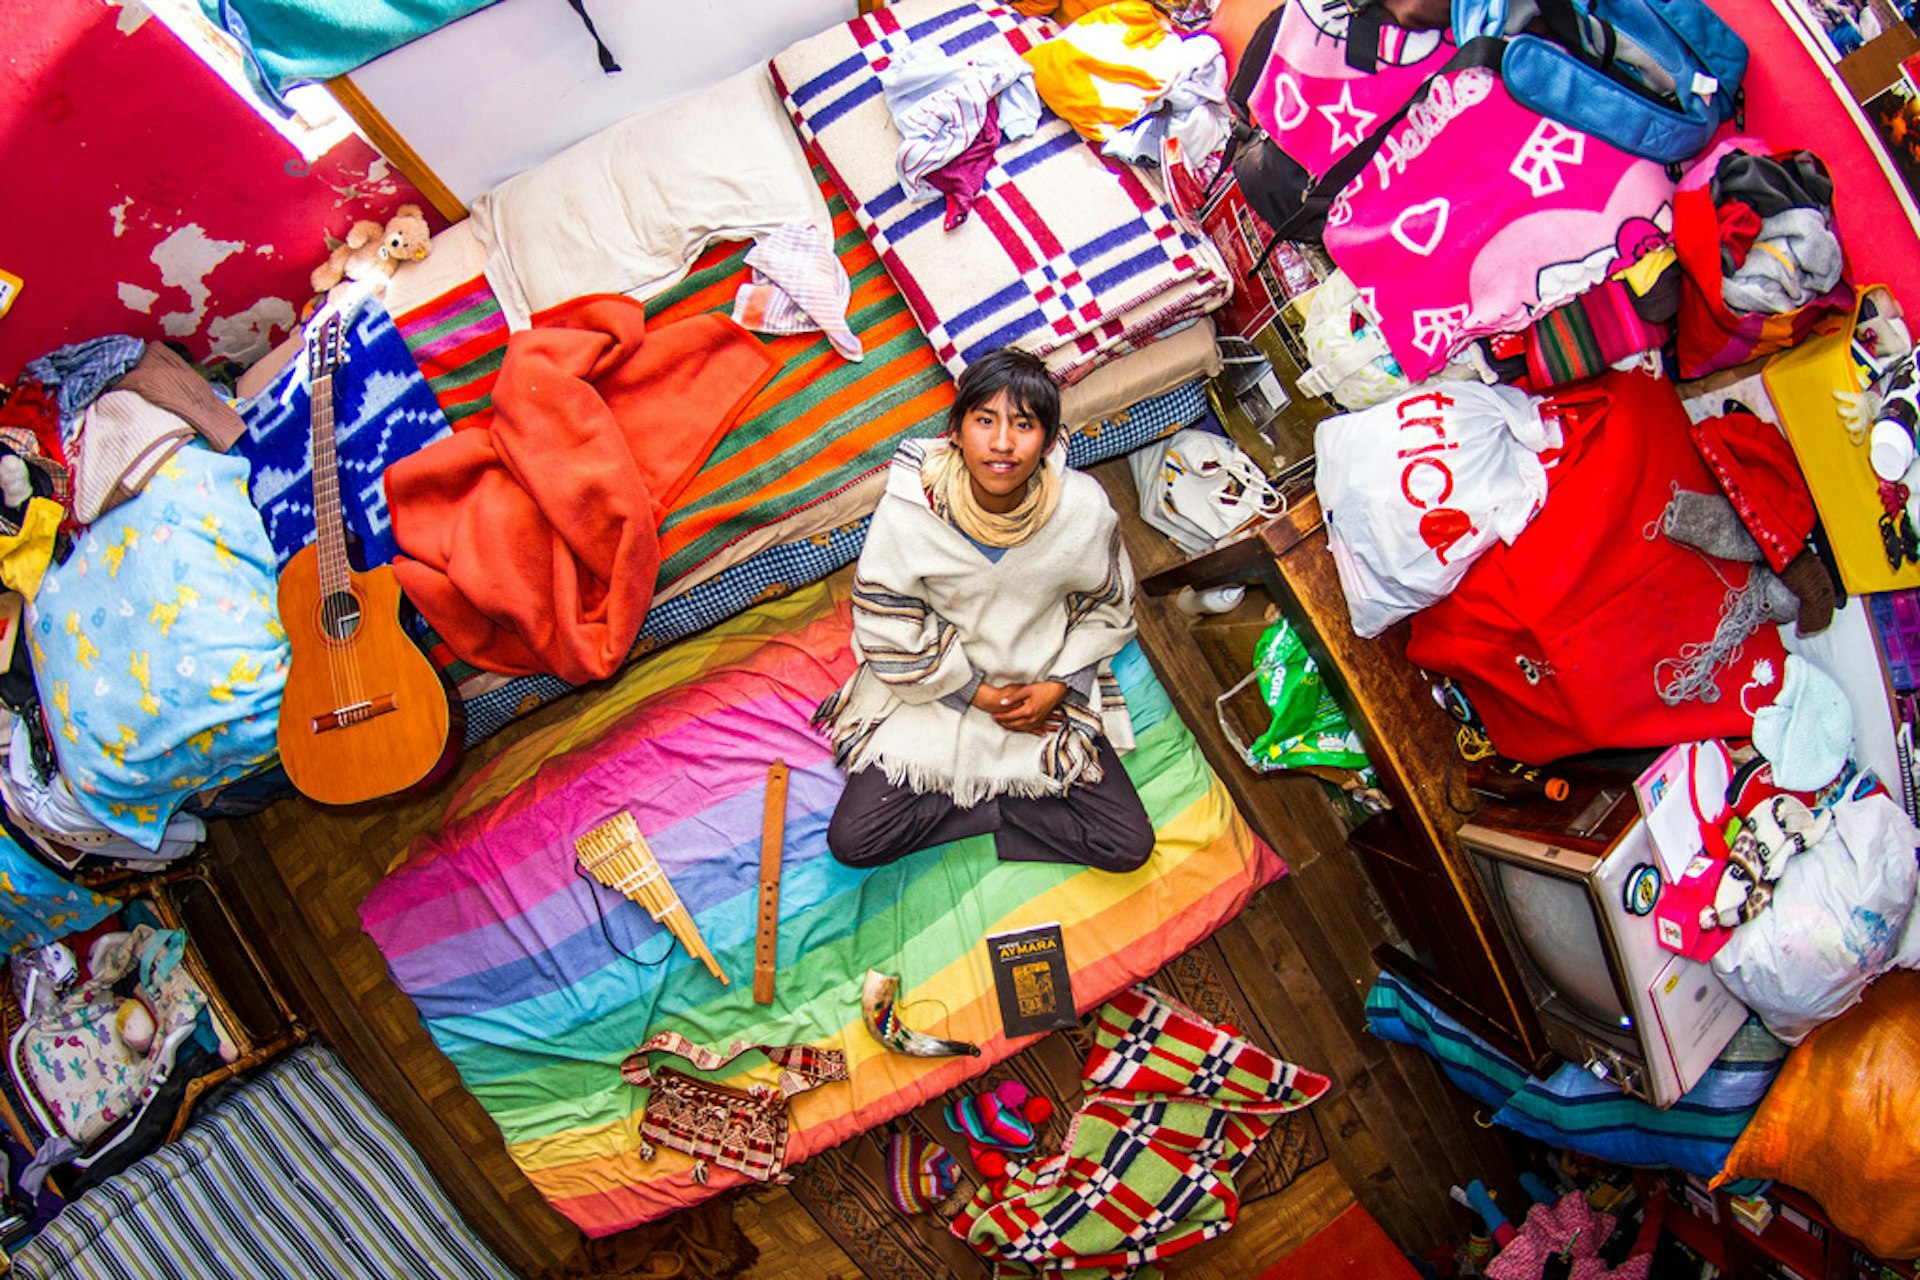 Inside the bedrooms of millennials all over the world